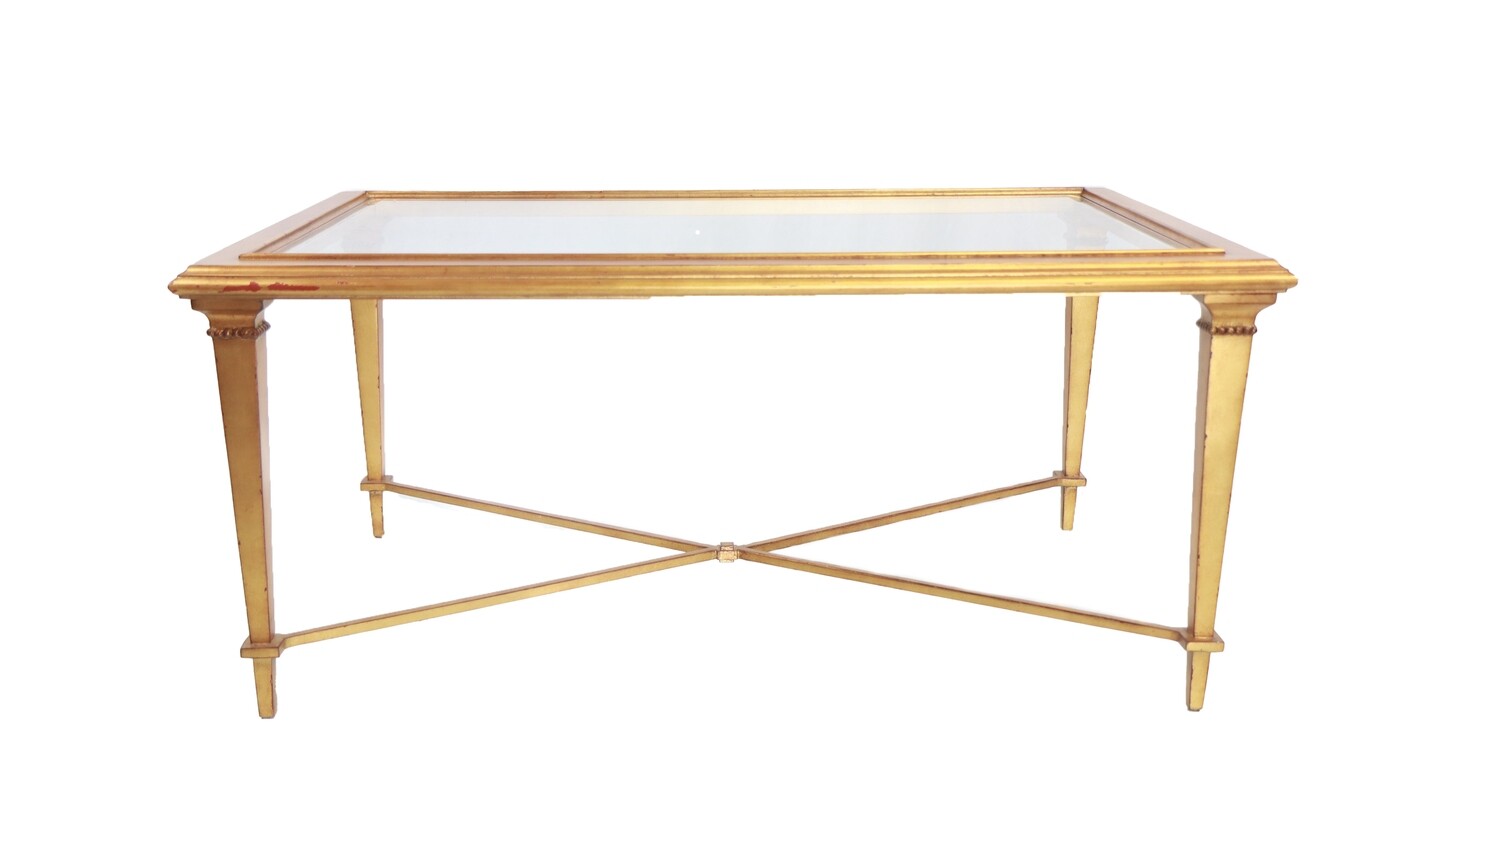 Wooden Gold & Tempered Glass Coffee Table